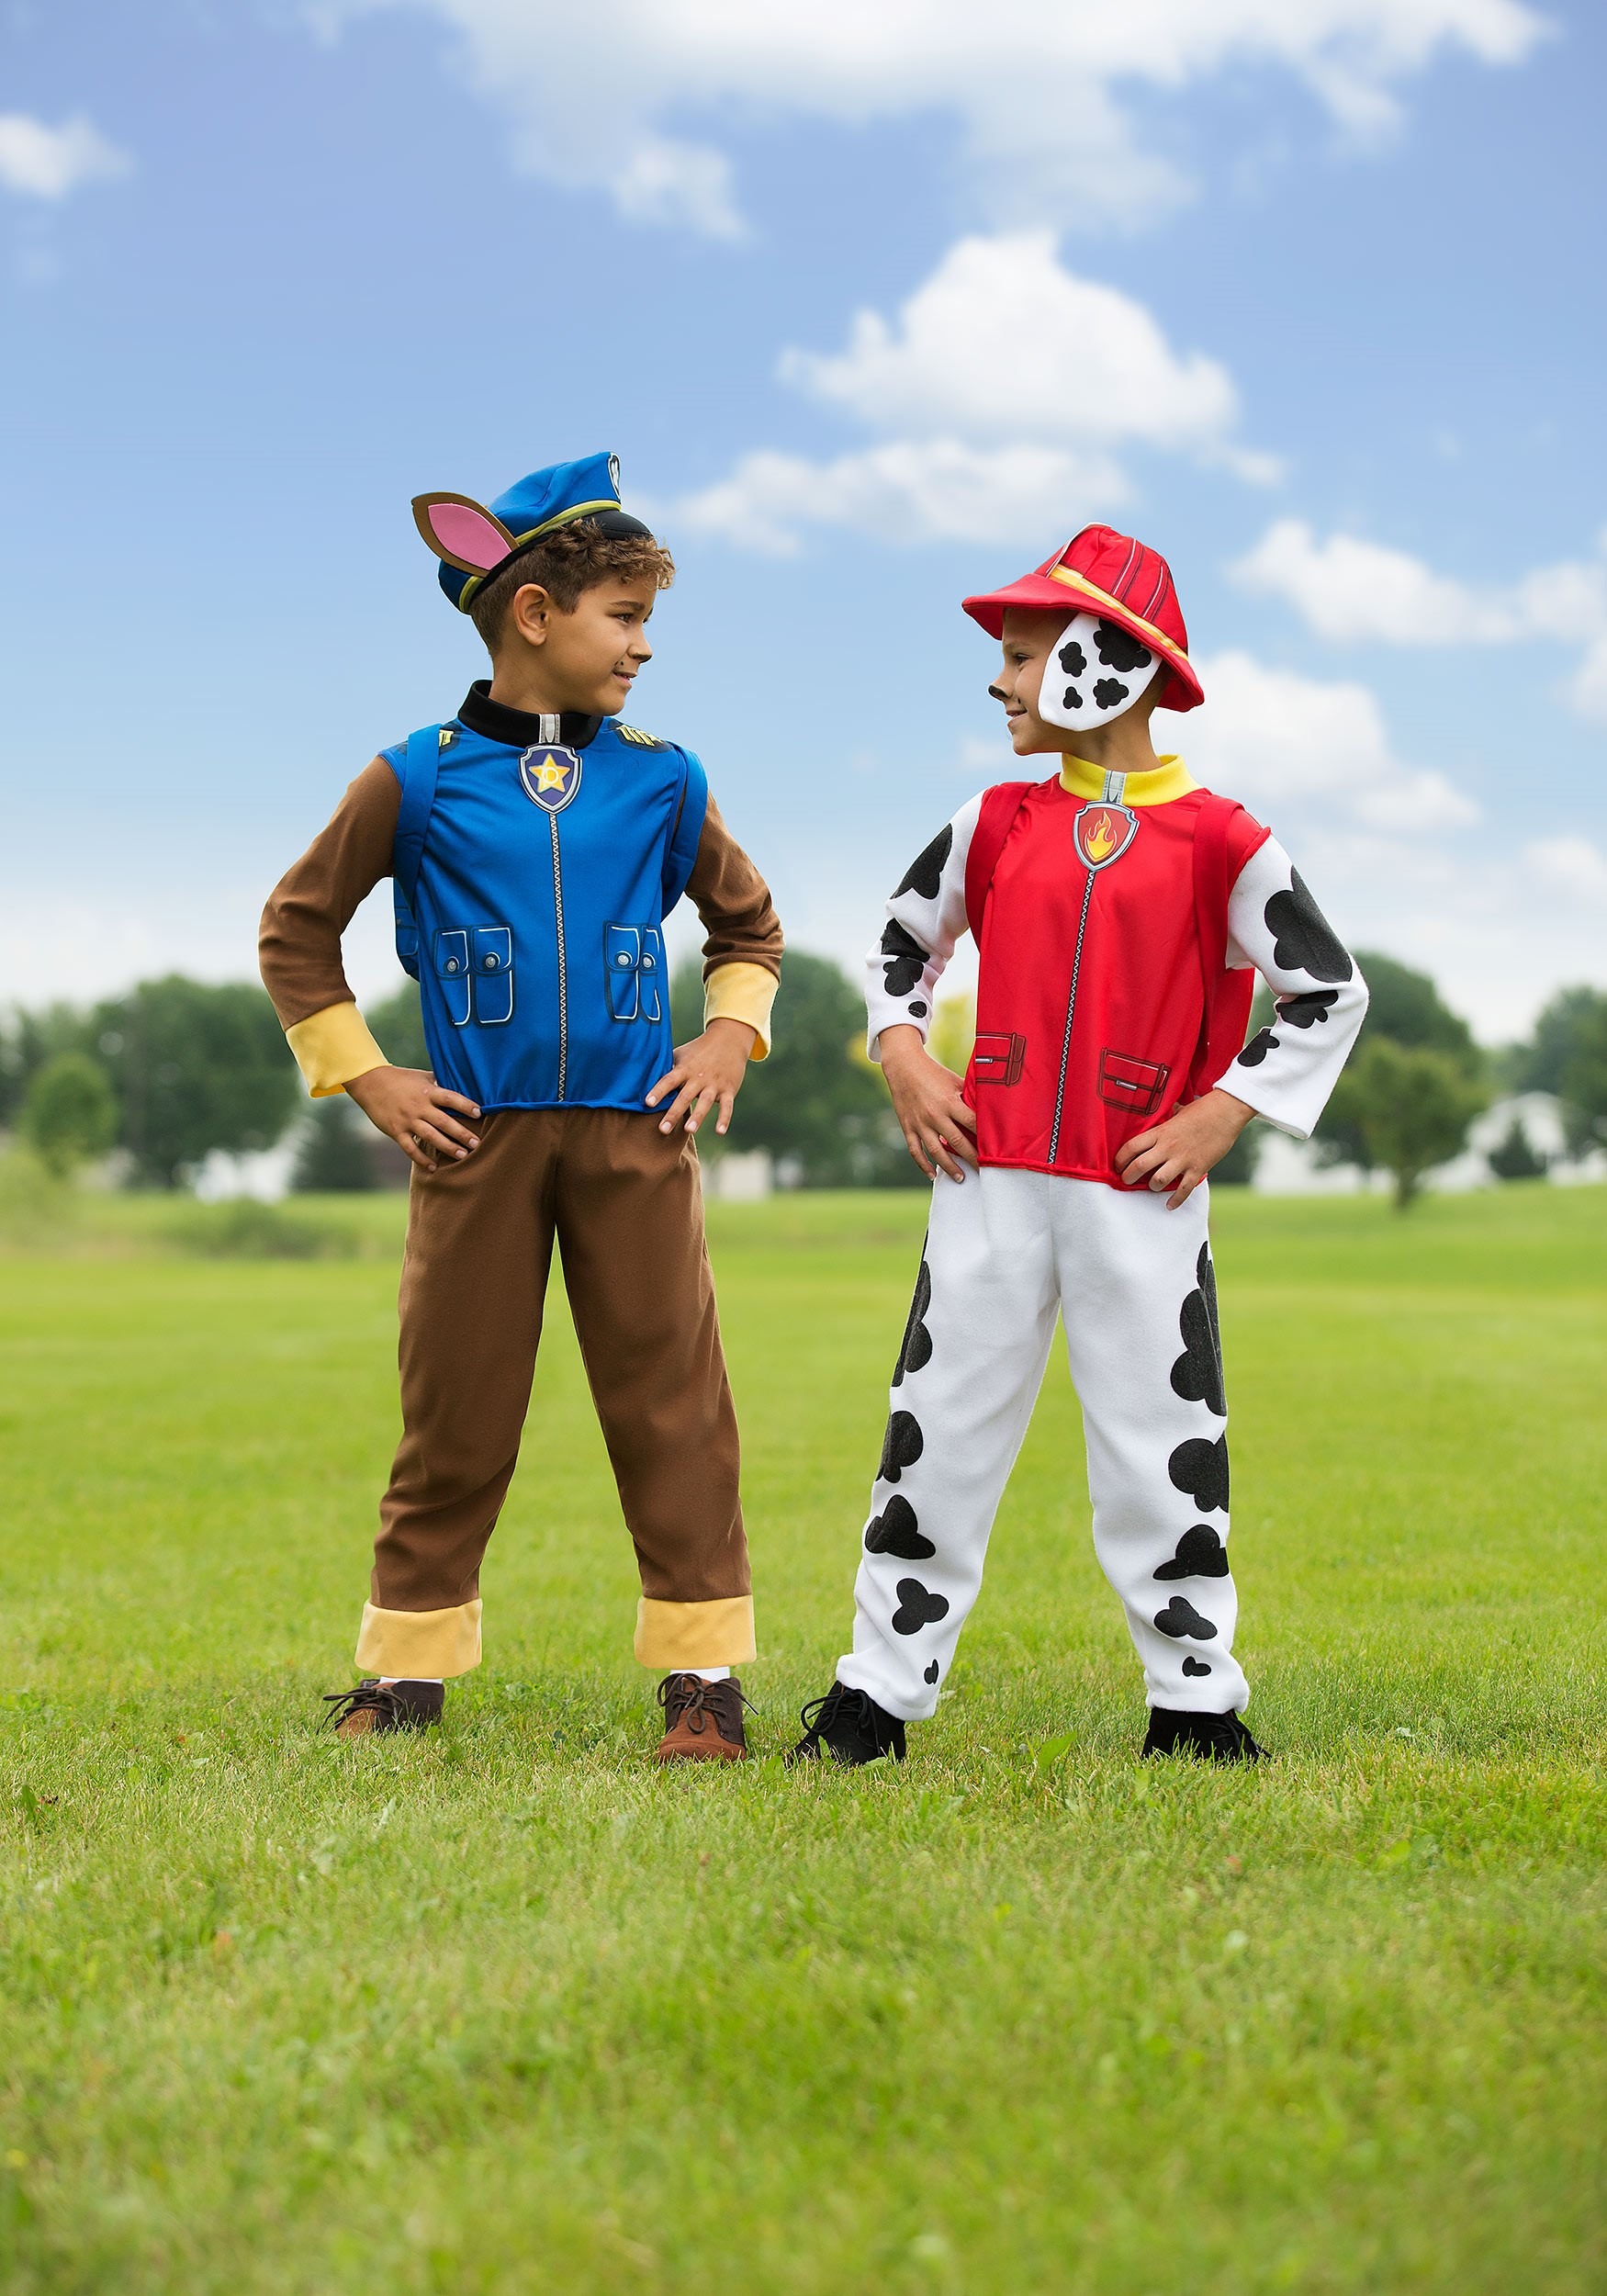 Chase Kids Costume from Paw Patrol